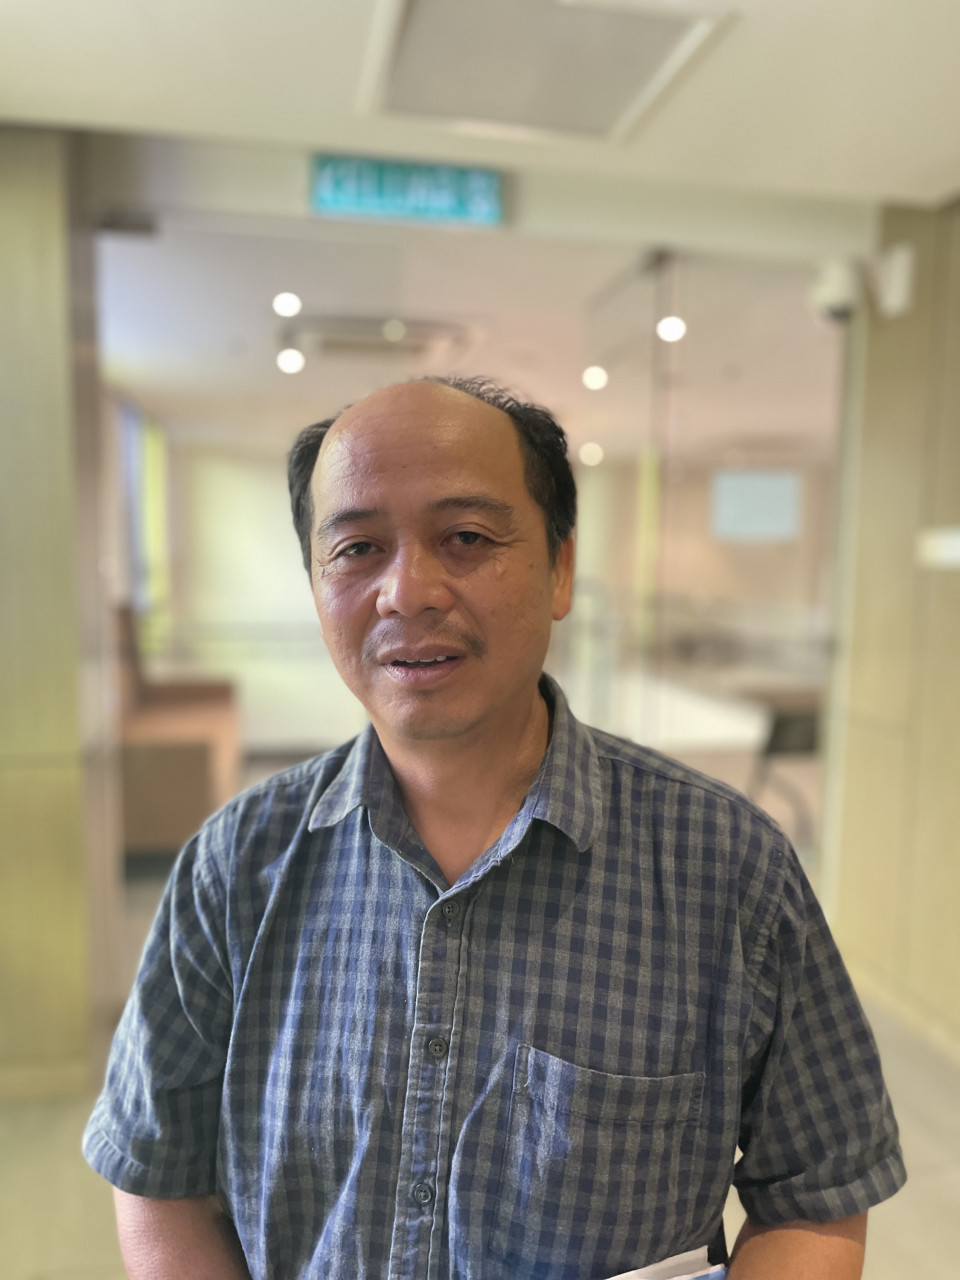 Indigenous rights activist Galus Ahtoi has worked to empower the indigenous communities in Sabah on native customary rights issues. – JASON SANTOS/The Vibes pic, November 6, 2023